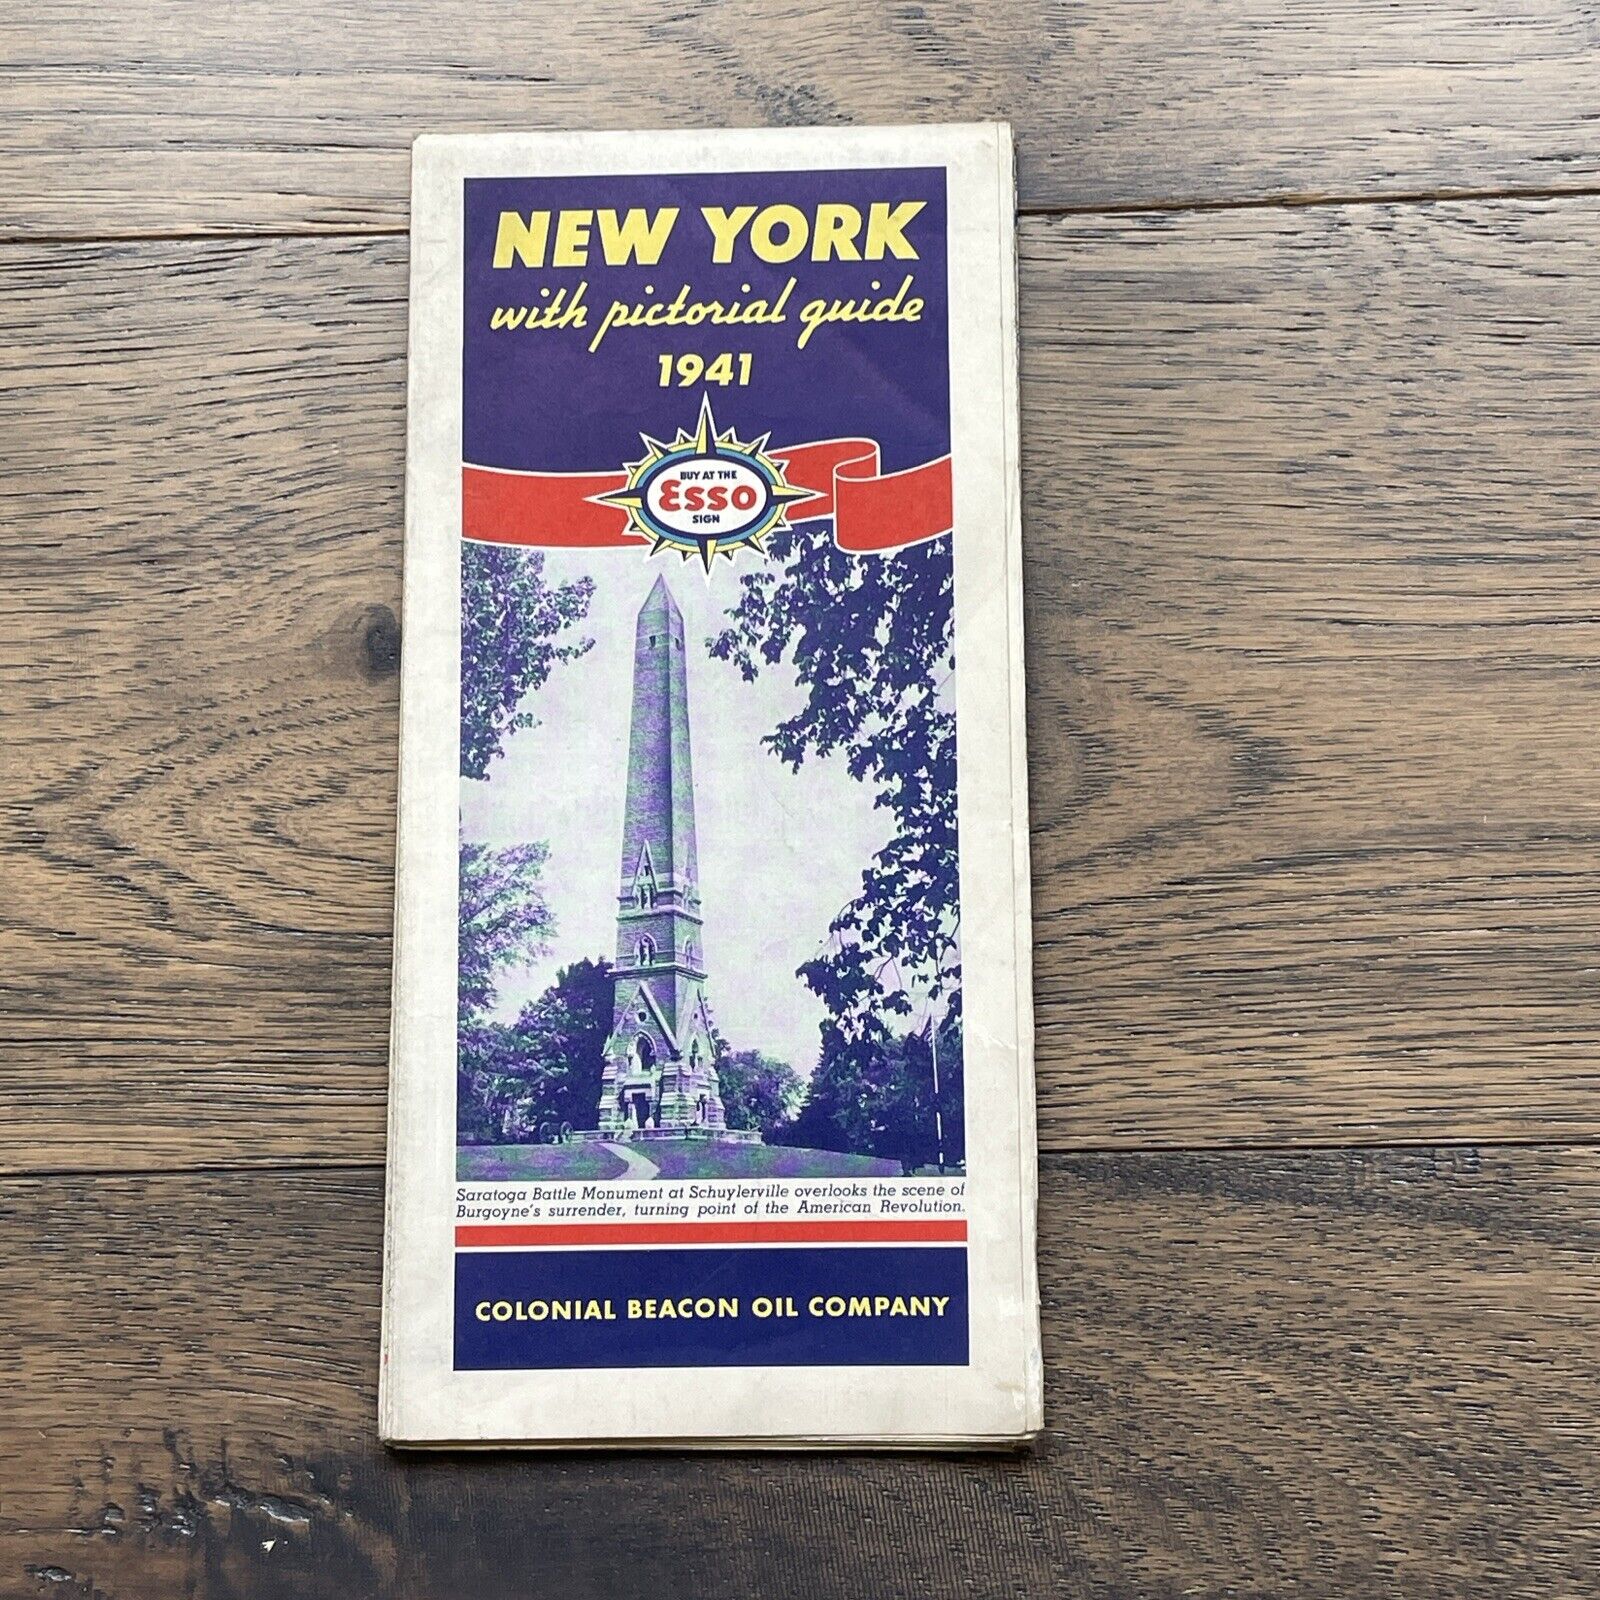 Vintage 1941 ESSO Standard Oil Co. Road Map and Pictorial Guide NEW YORK